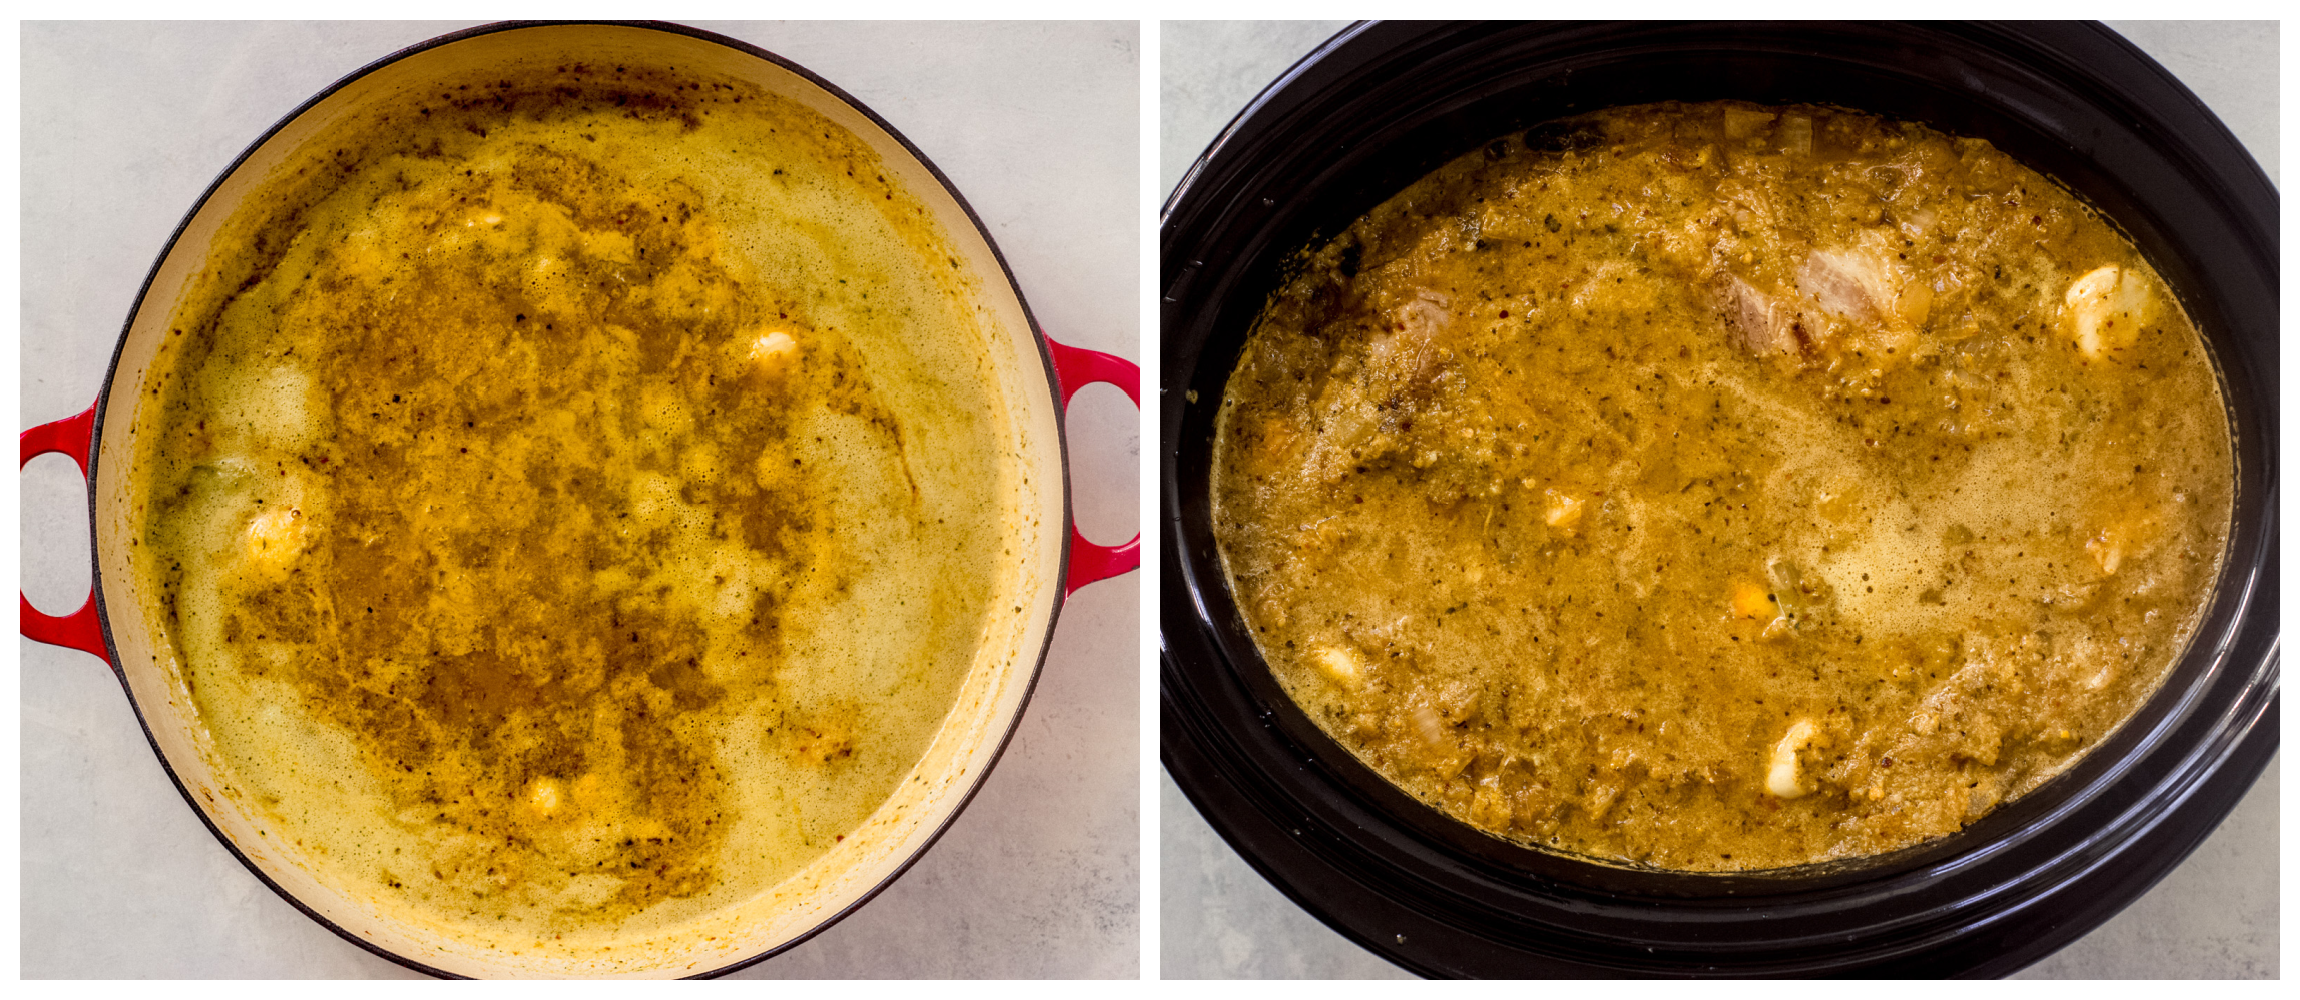 two photos showing cooked onions with liquid in one, and pork and beans inside the crockpot covered in onion liquid mixture in second.